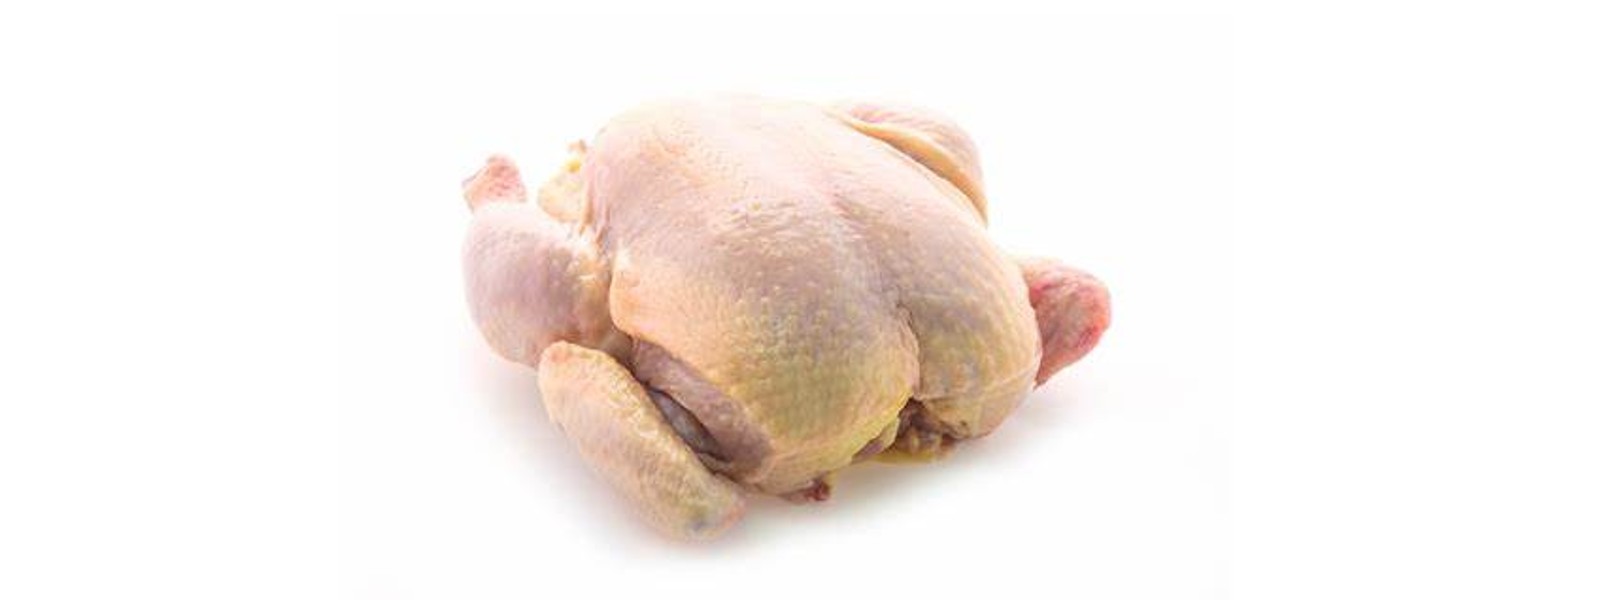 Chicken prices down by Rs. 250